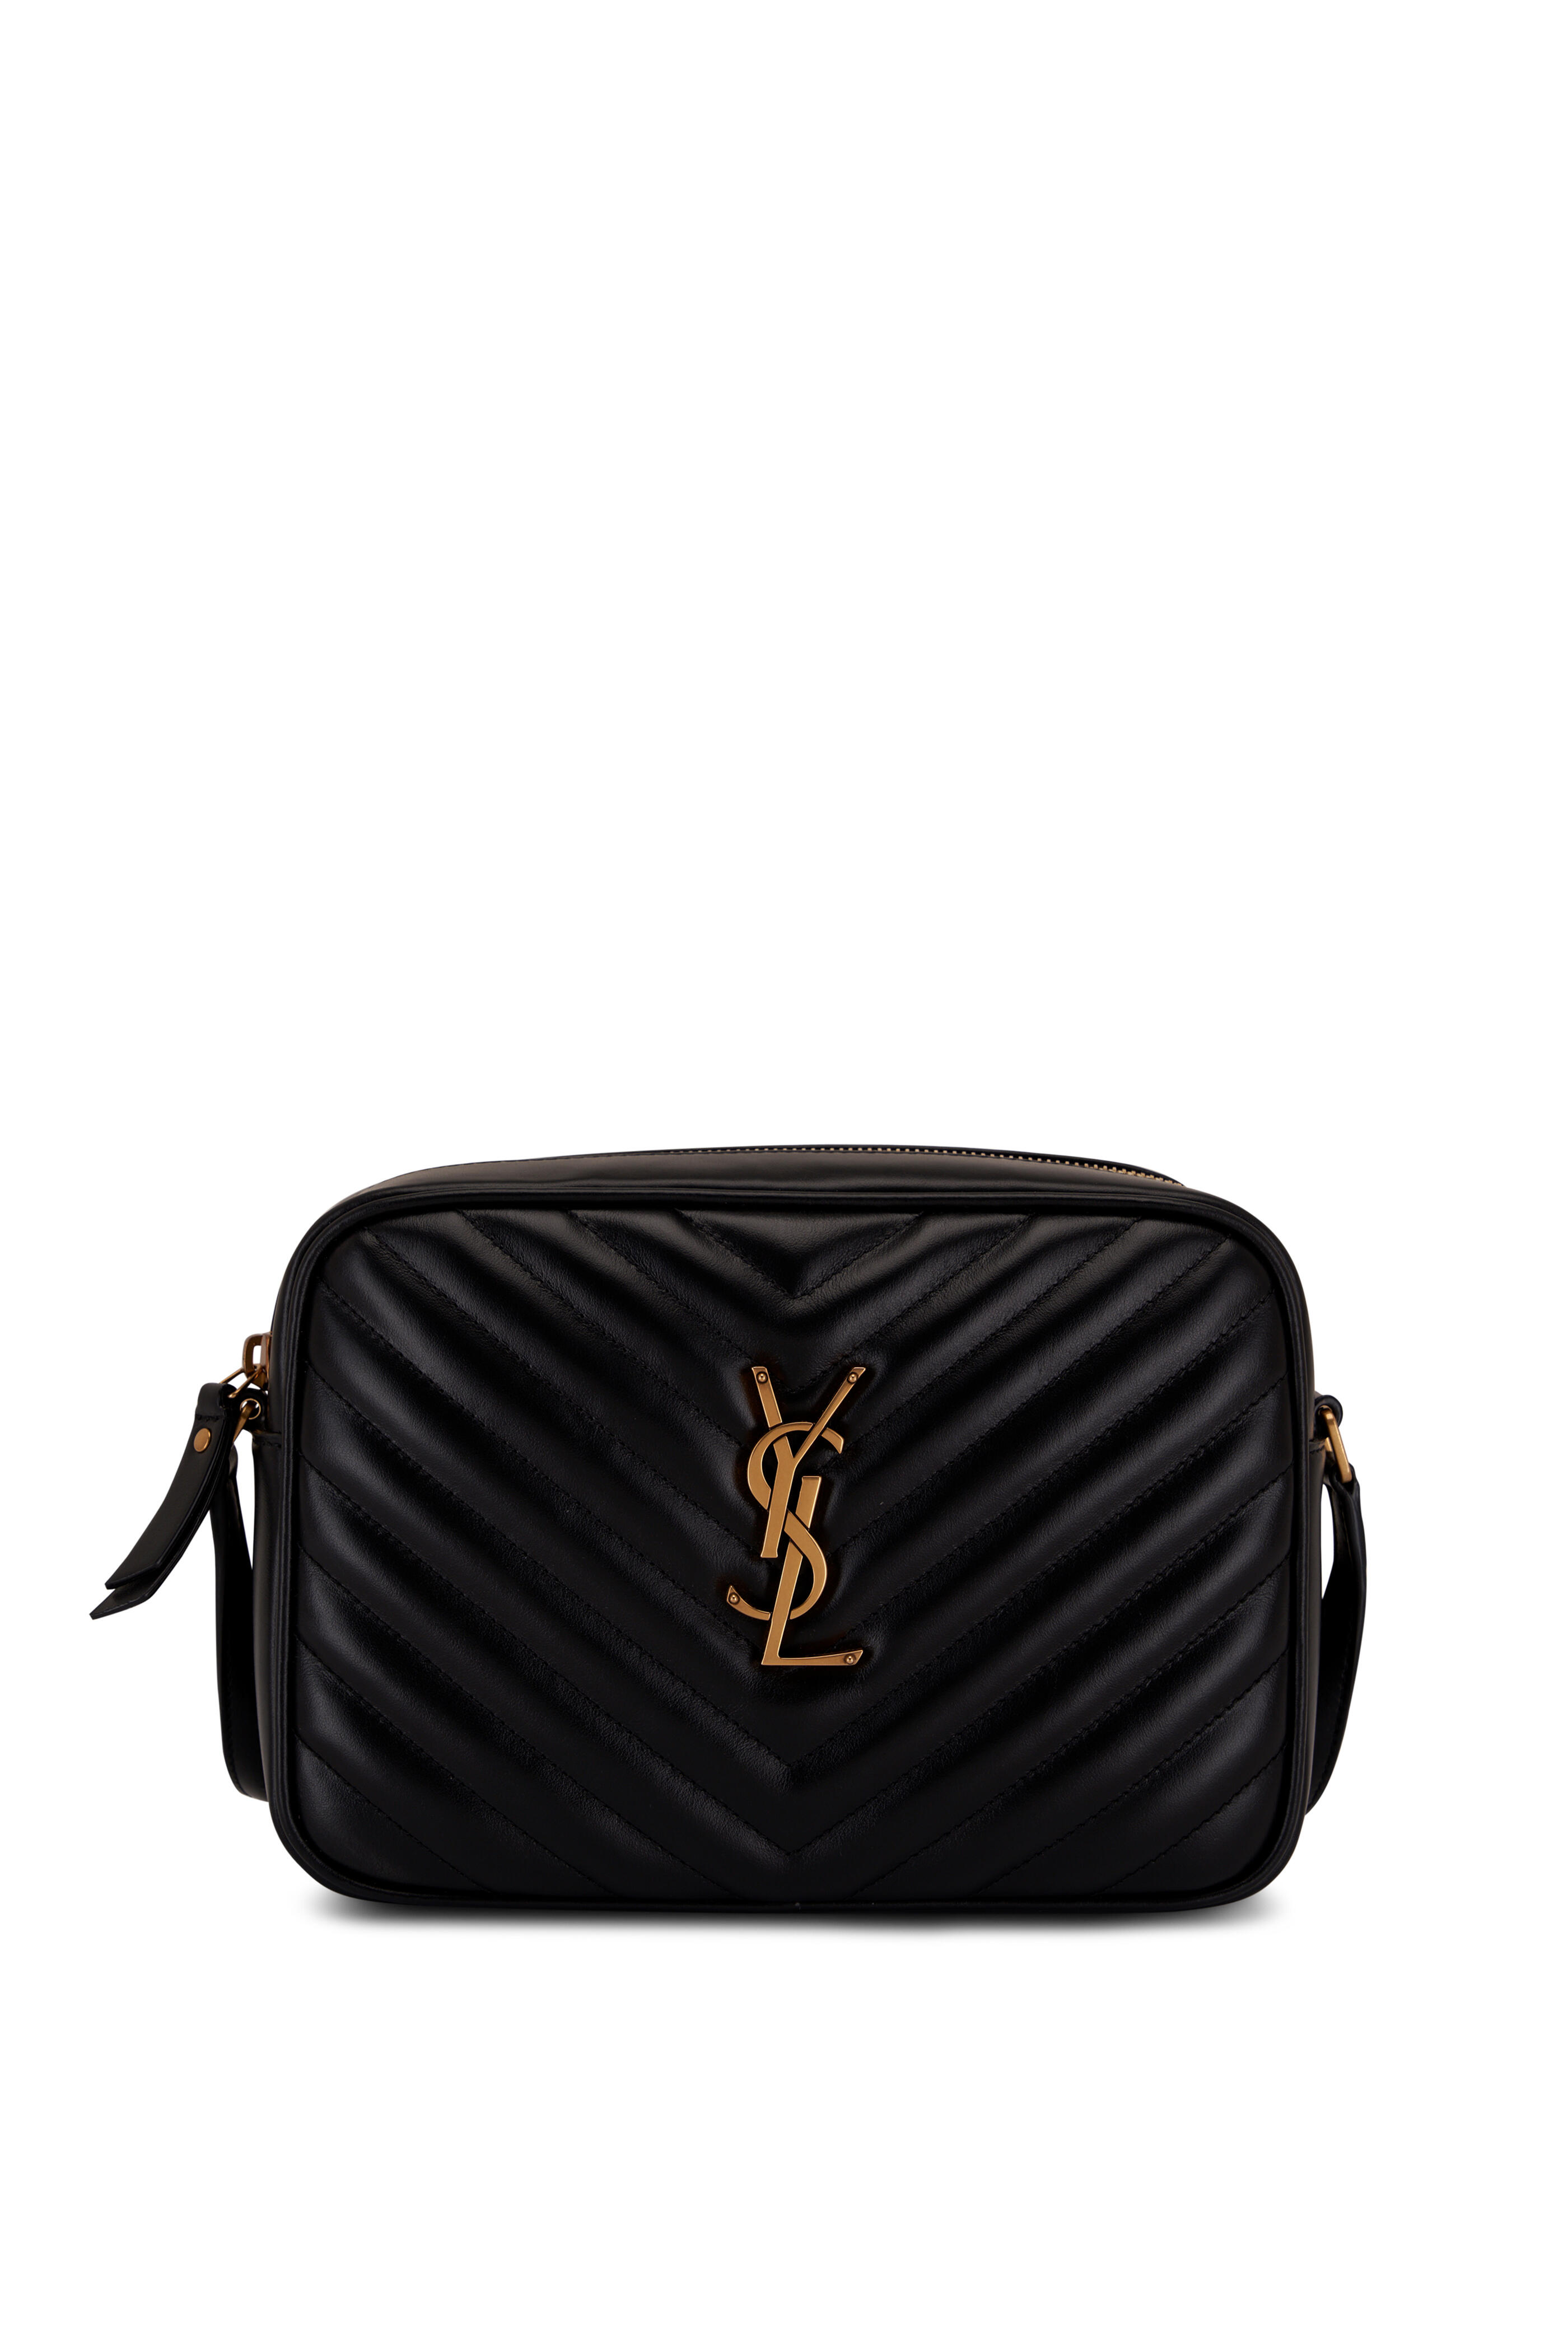 Saint Laurent Smooth Leather Lou Camera Bag, Detailed Review